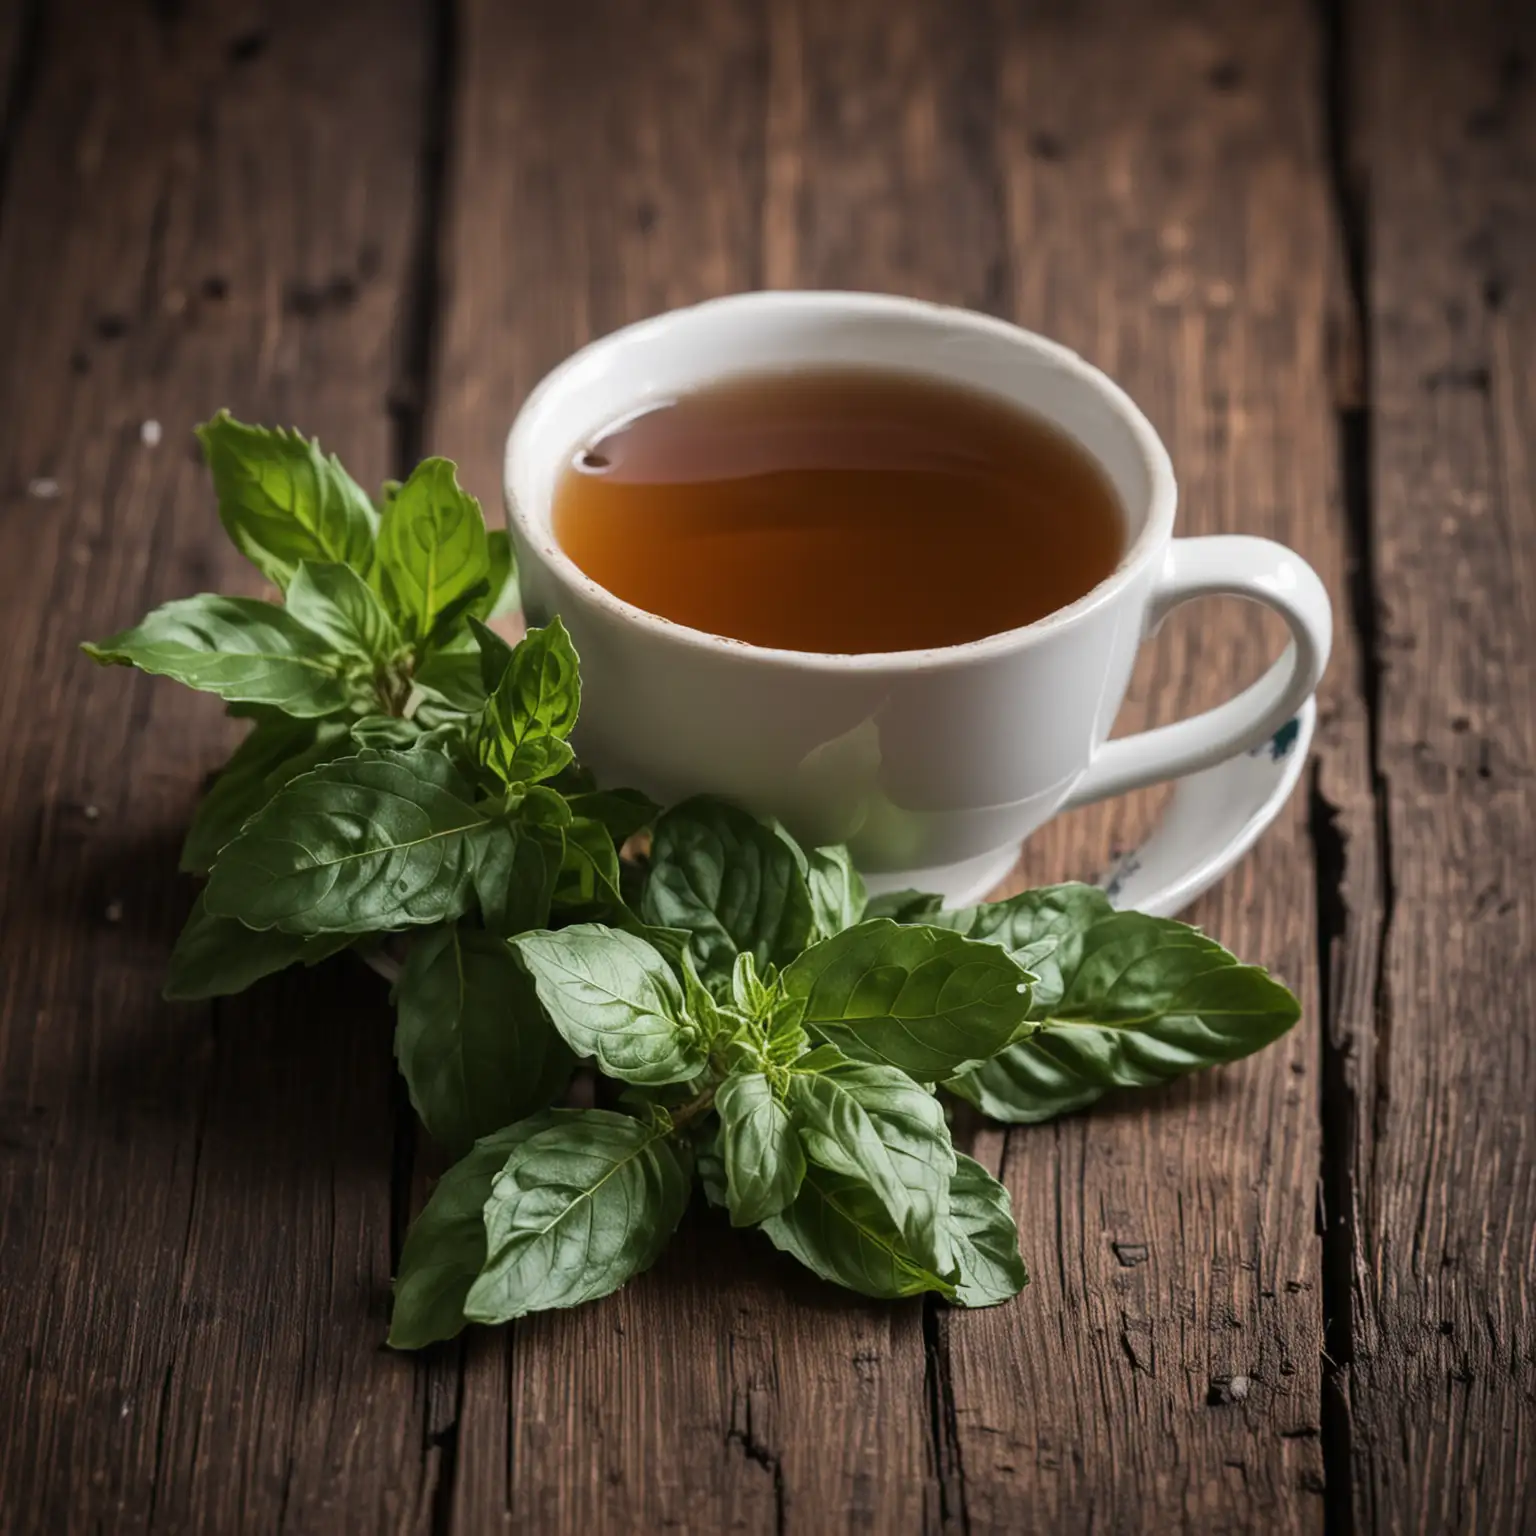 Holy Basil Plant and Tea on Dark Wooden Table